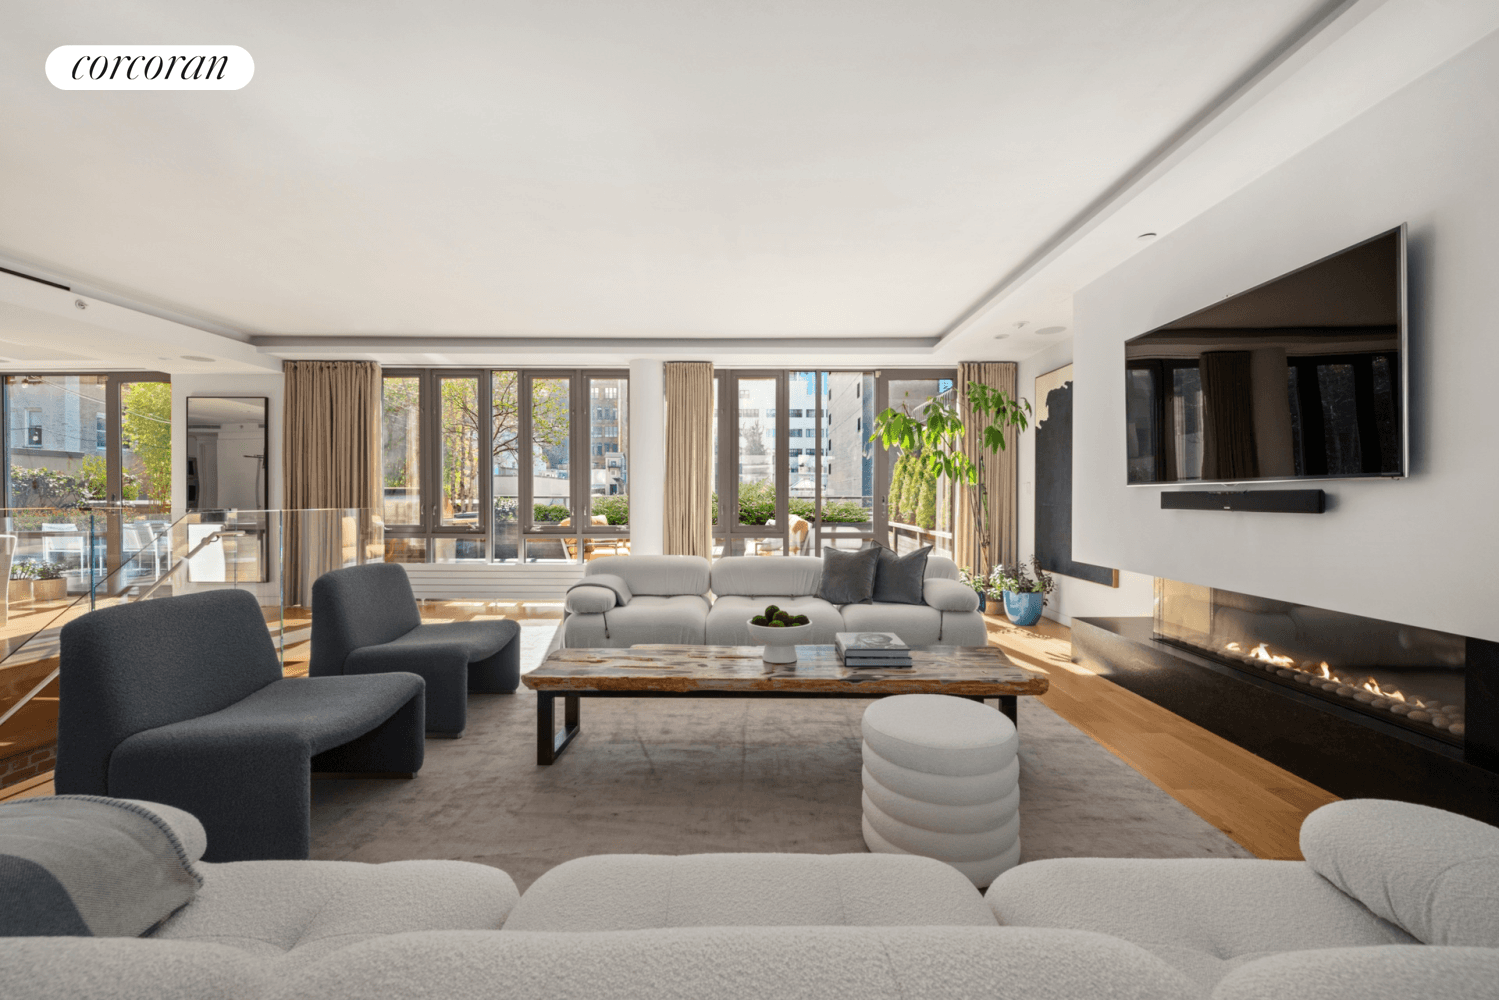 Townhouse proportions meet condominium appeal in this spectacular five bedroom, five and a half bathroom penthouse duplex featuring sun drenched living spaces, a 51 foot wide south facing private terrace, ...